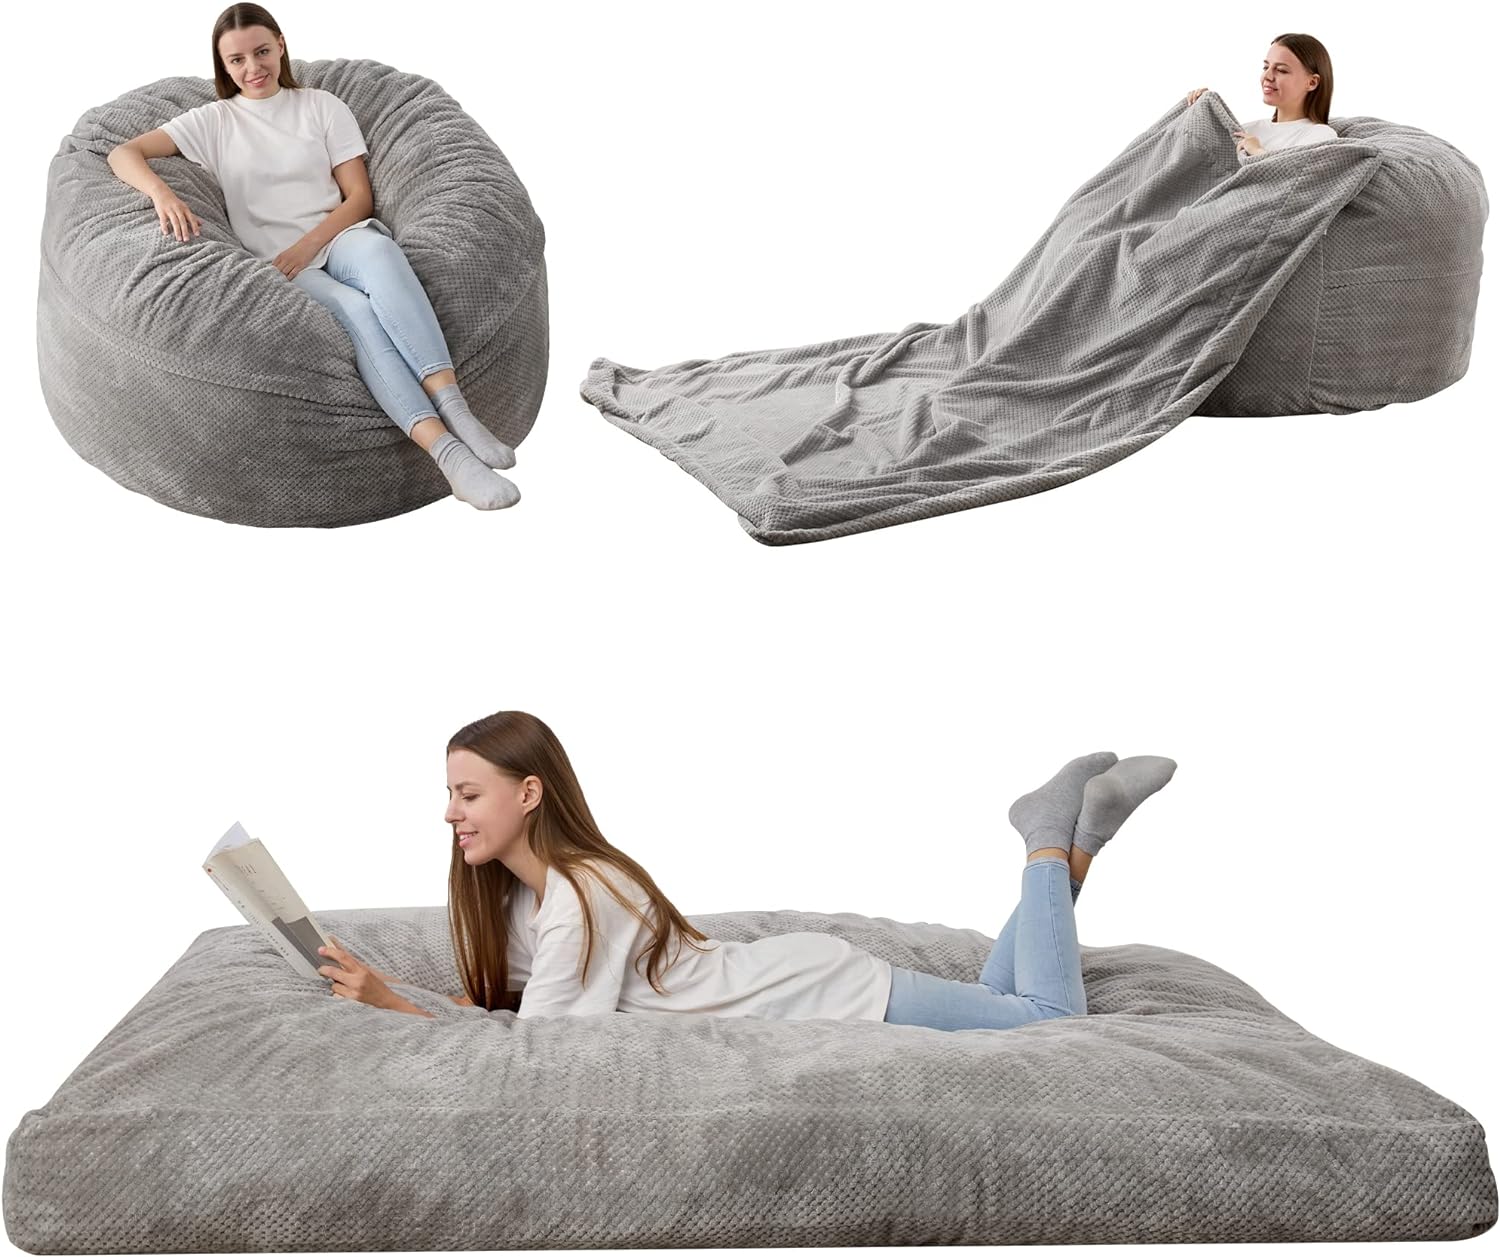 HABUTWAY Bean Bag Chair, Giant Bean Bag Chair with Washable Chenille Cover Ultra Soft, Convertible Bean Bag from Chair to Mattress, Huge Chenille Bean Bags for Adult, Couples, Family - Grey Full